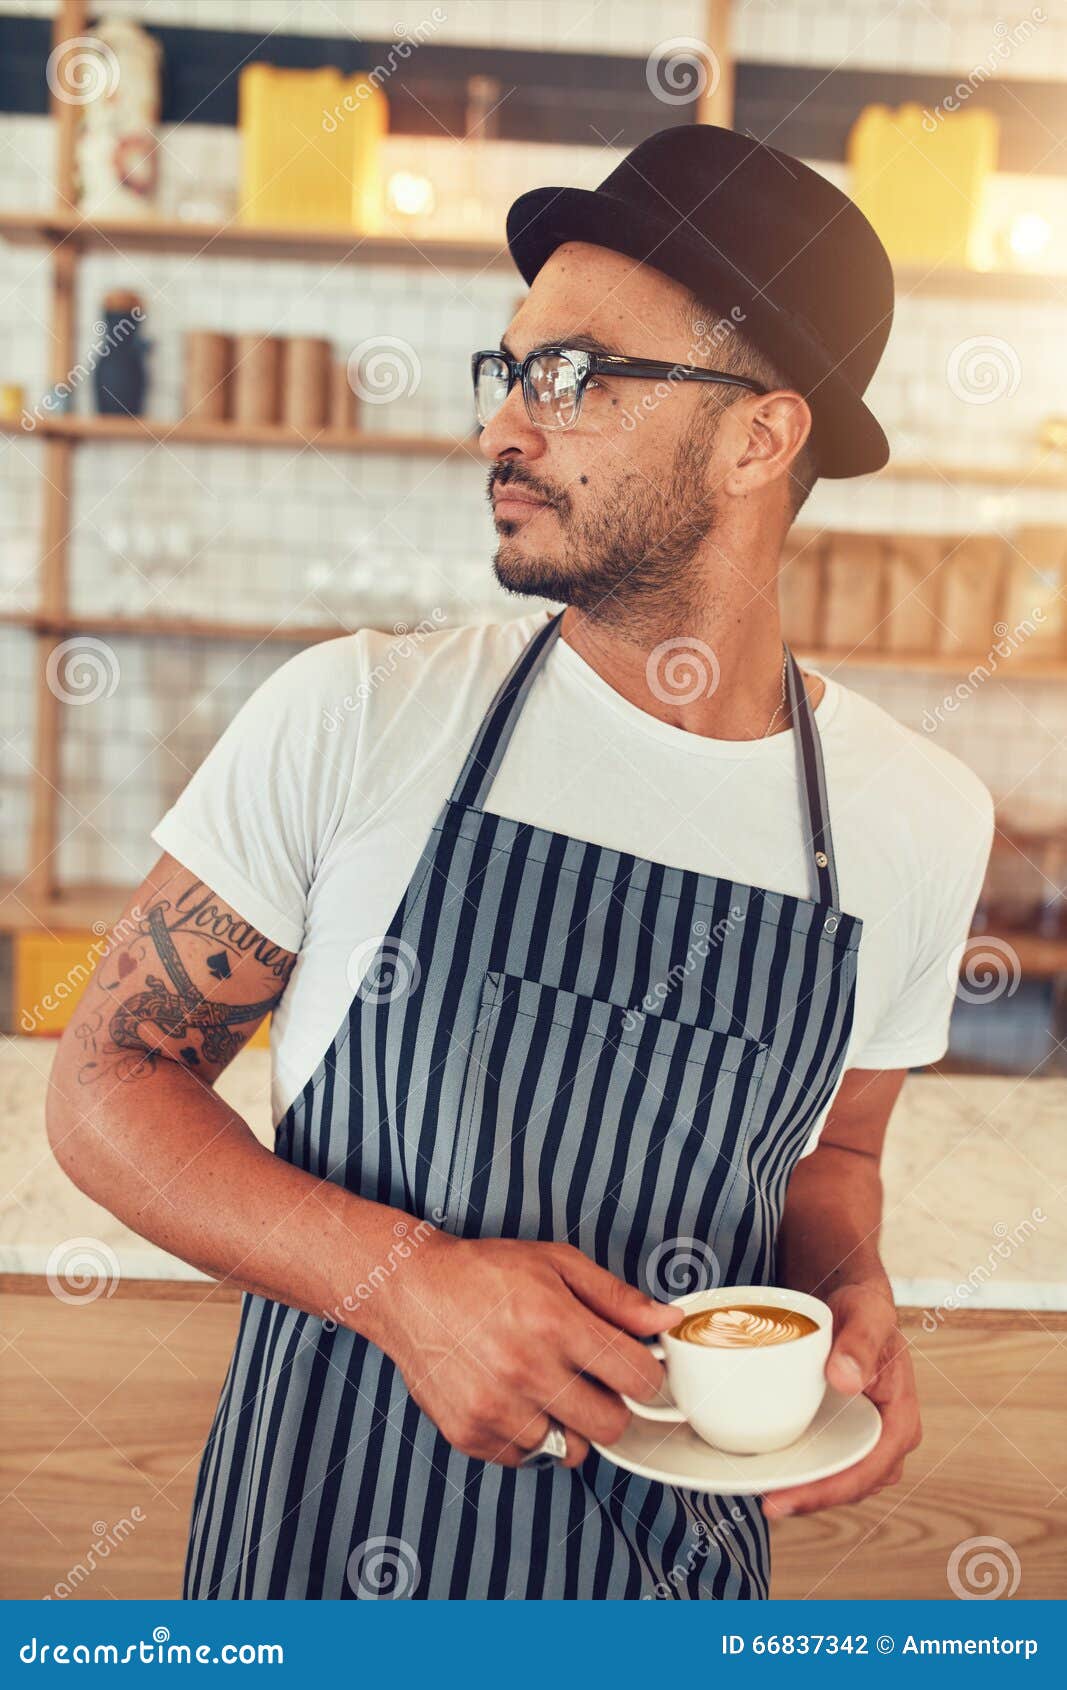 Male Barista Standing at Coffee Shop Stock Photo Image of barista